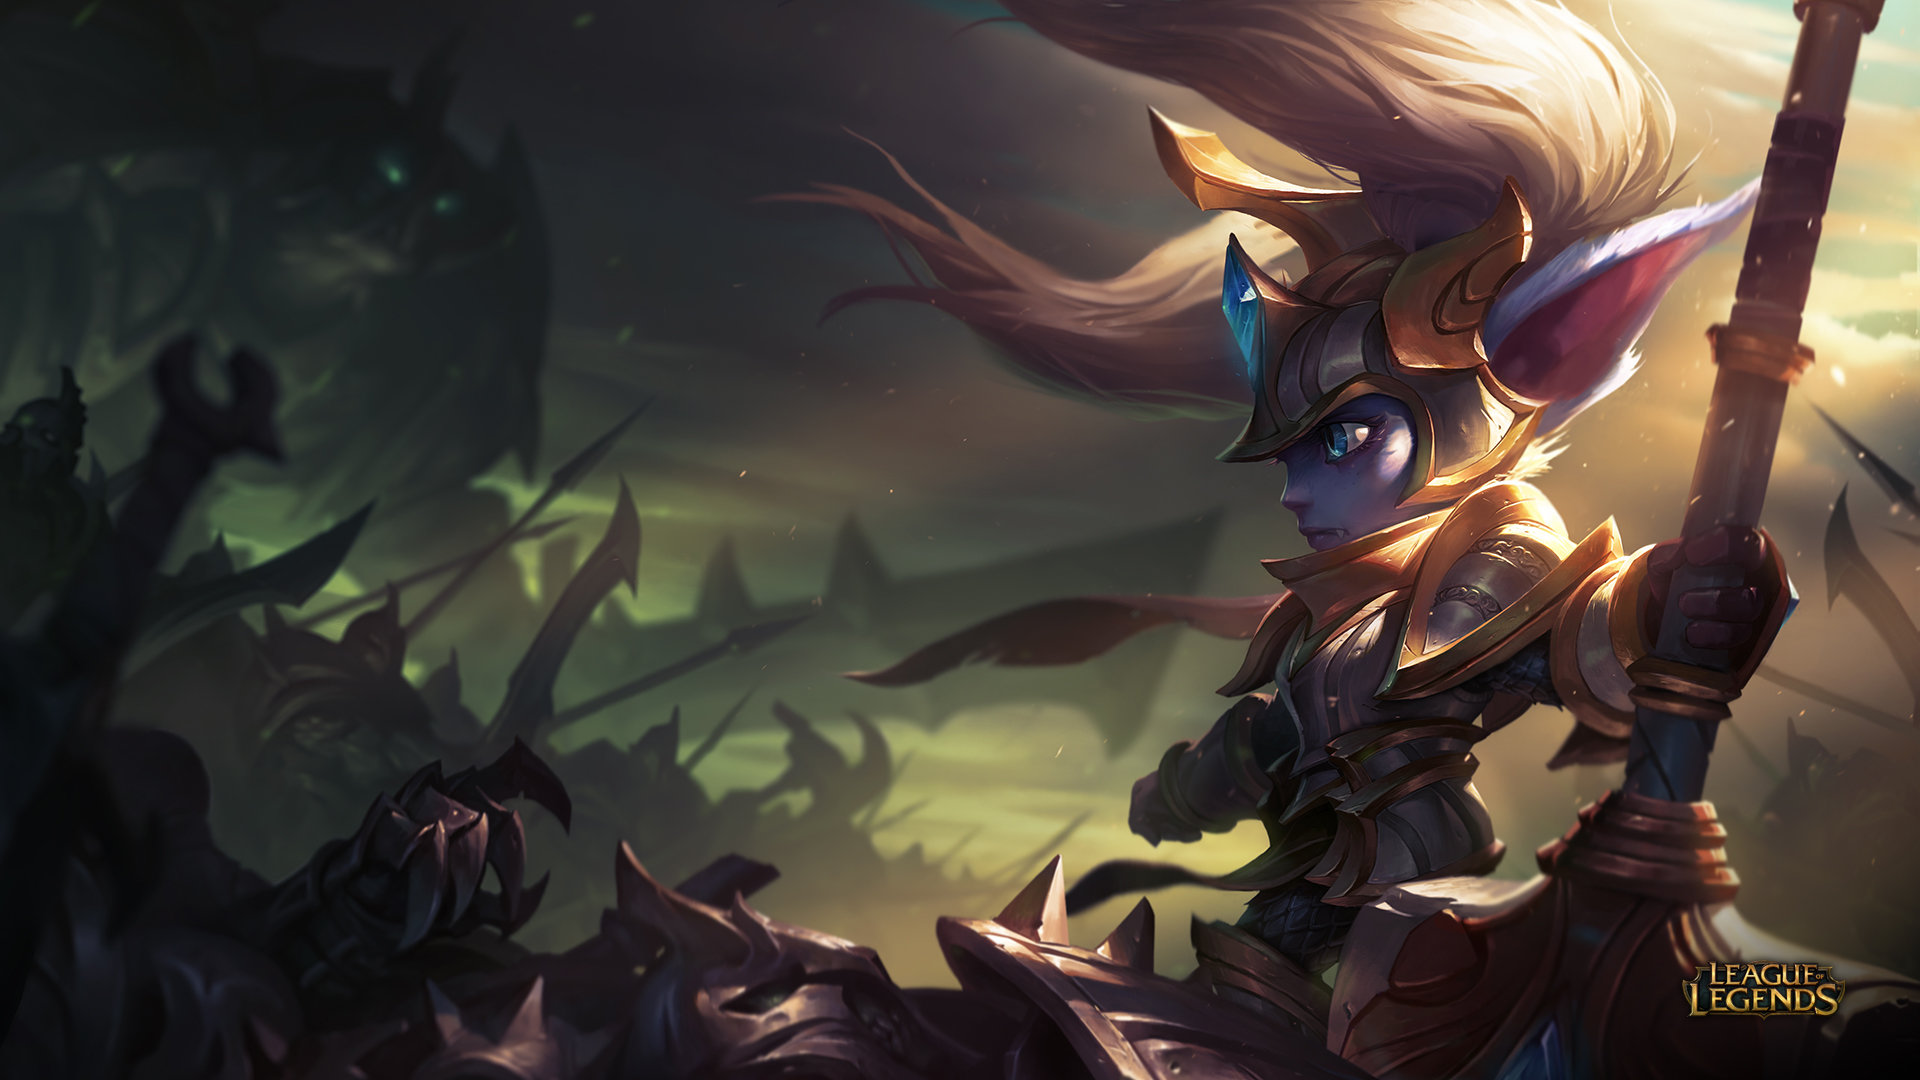 Best Poppy (League Of Legends) wallpaper ID:171528 for High Resolution full hd 1920x1080 PC